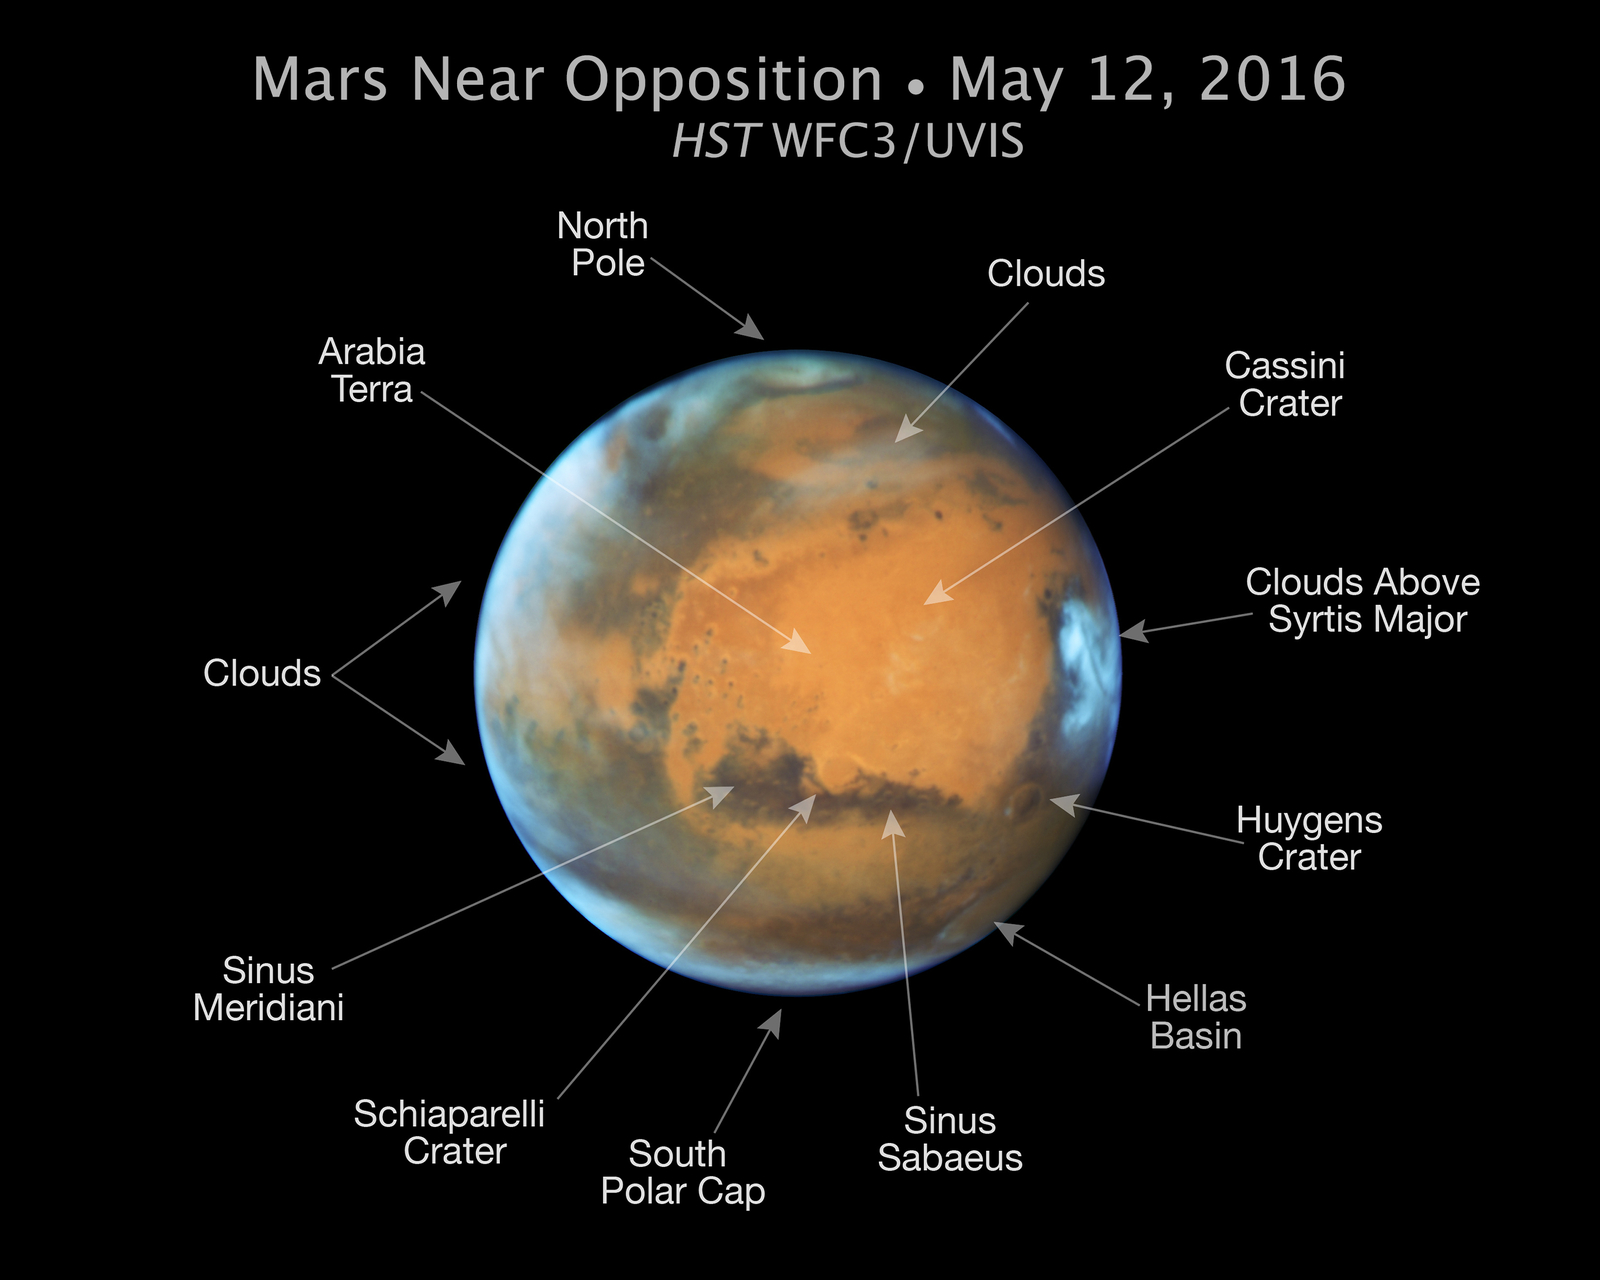 On May 30, Mars will be the closest it has been to Earth in 11 years, at a distance of 46.8 million miles. Mars is especially photogenic during opposition because it can be seen fully illuminated by the sun as viewed from Earth.